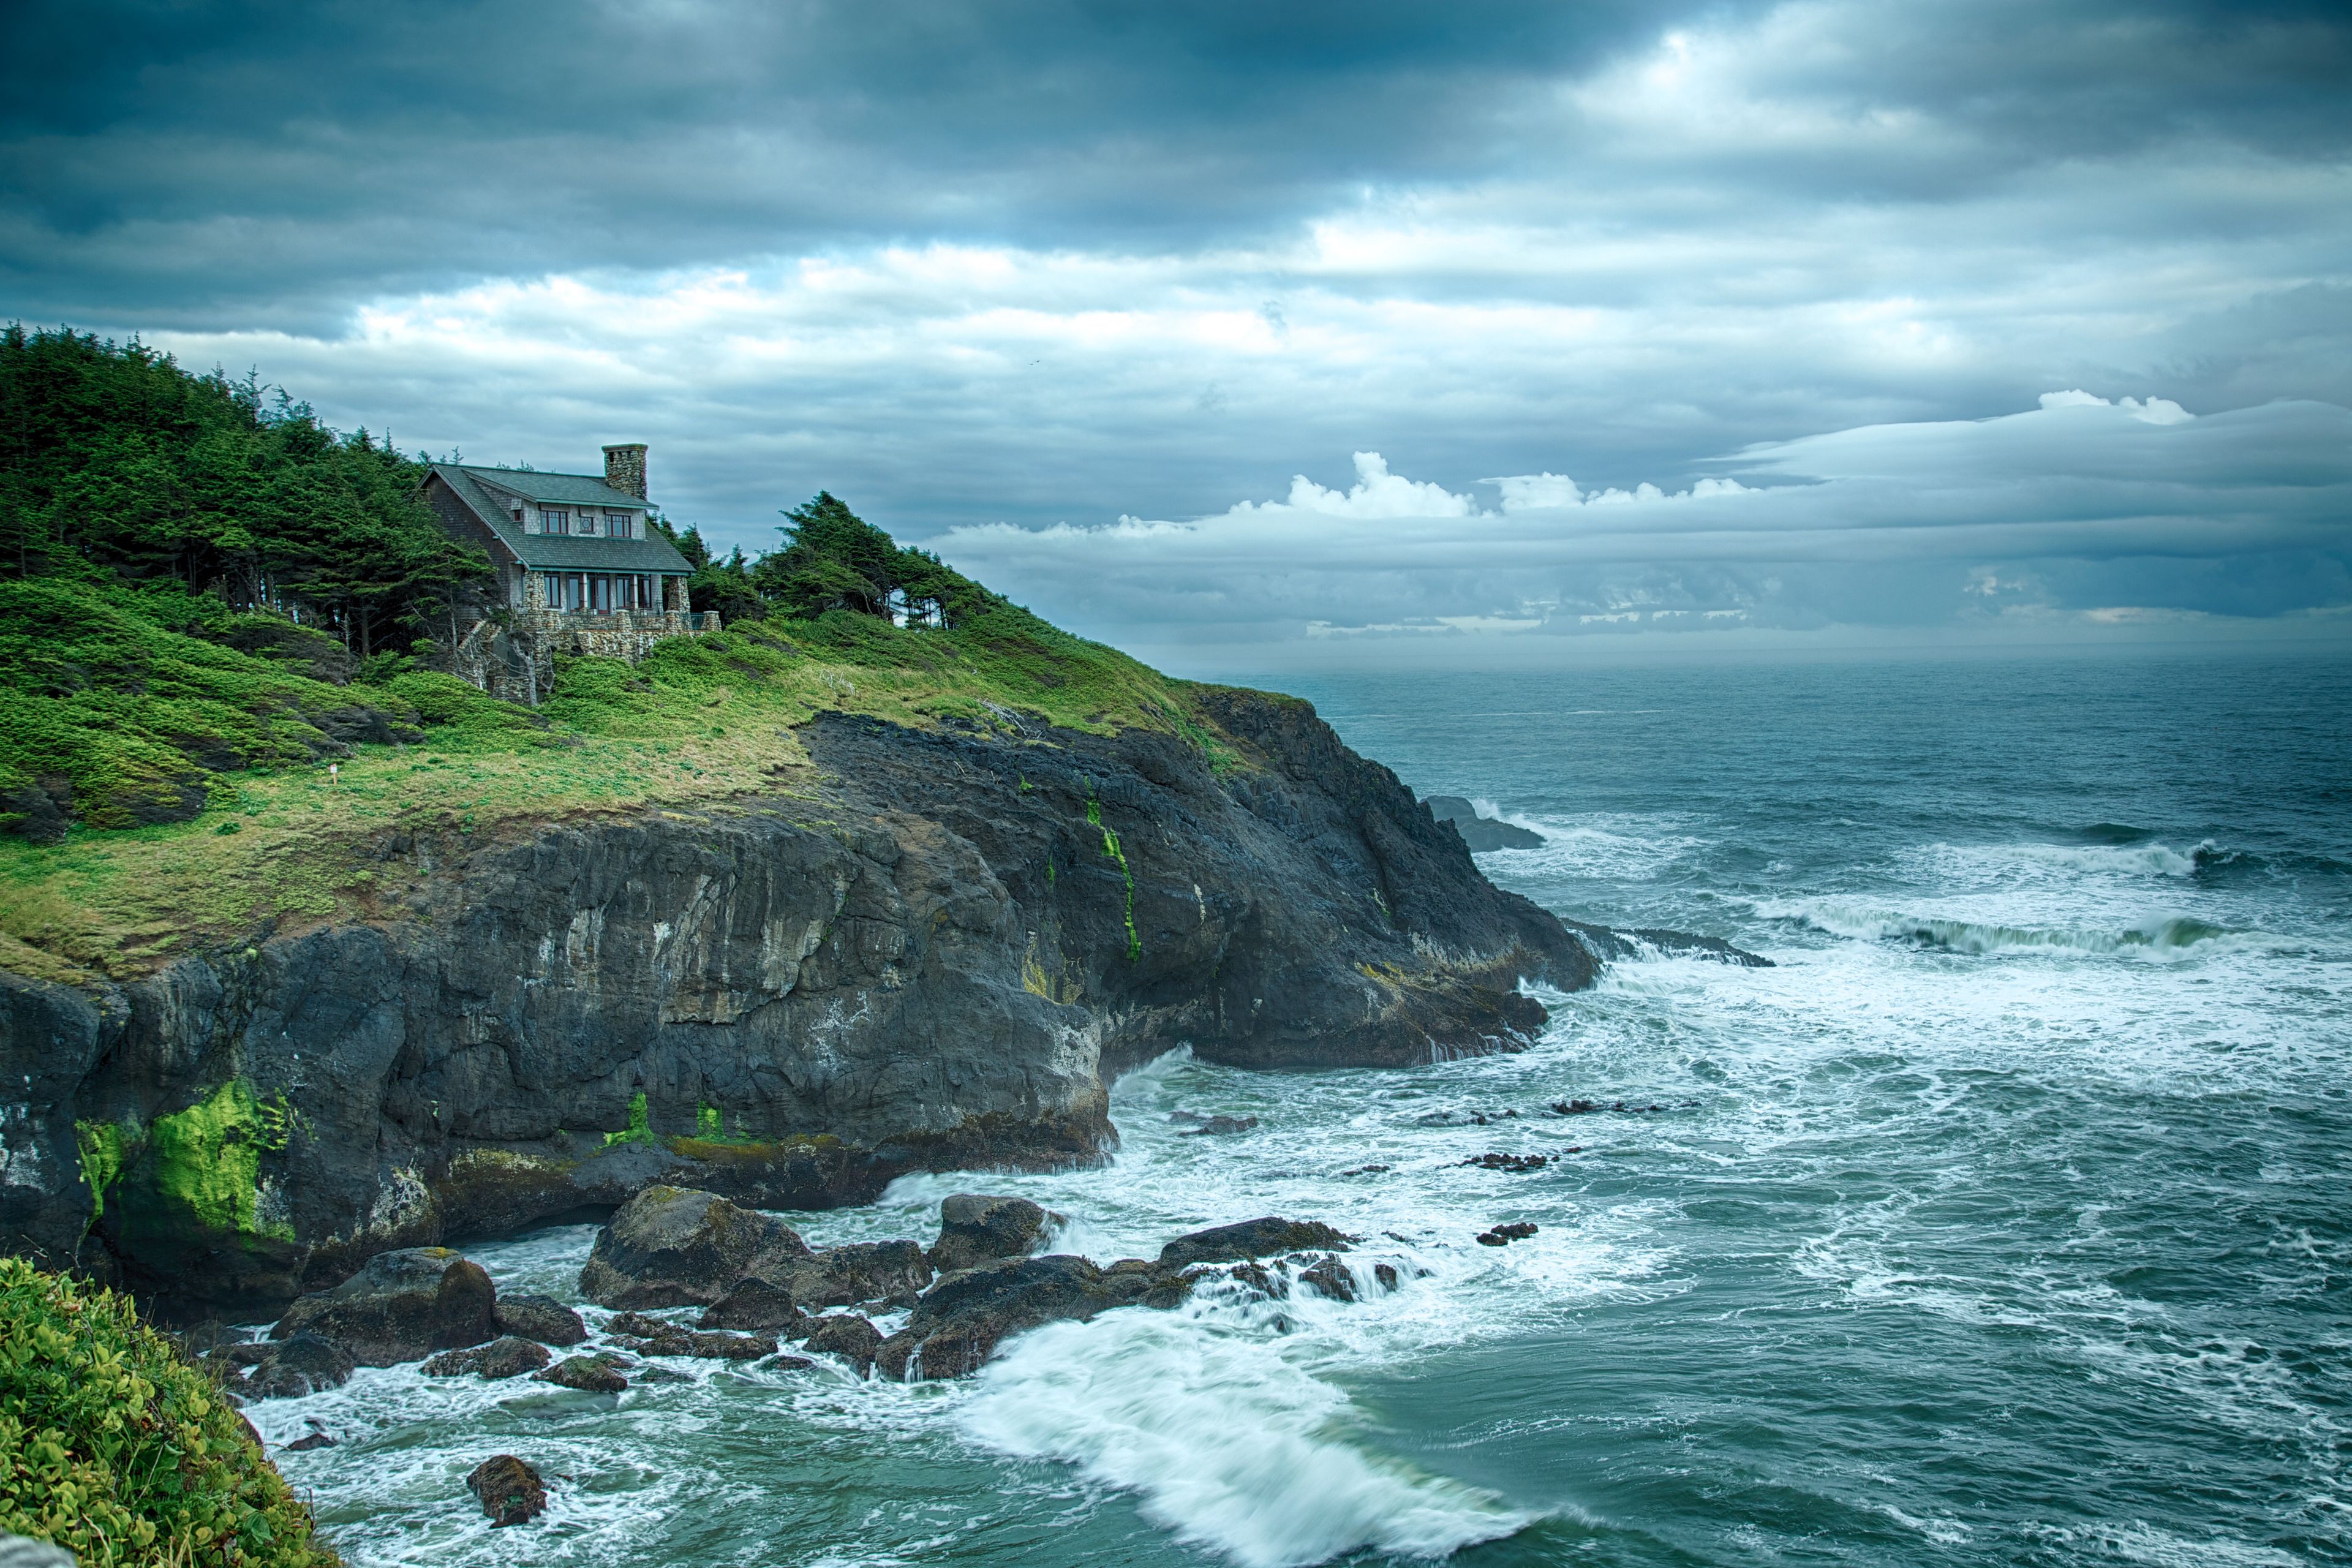 A house sits on a rocky cliff and coastline.